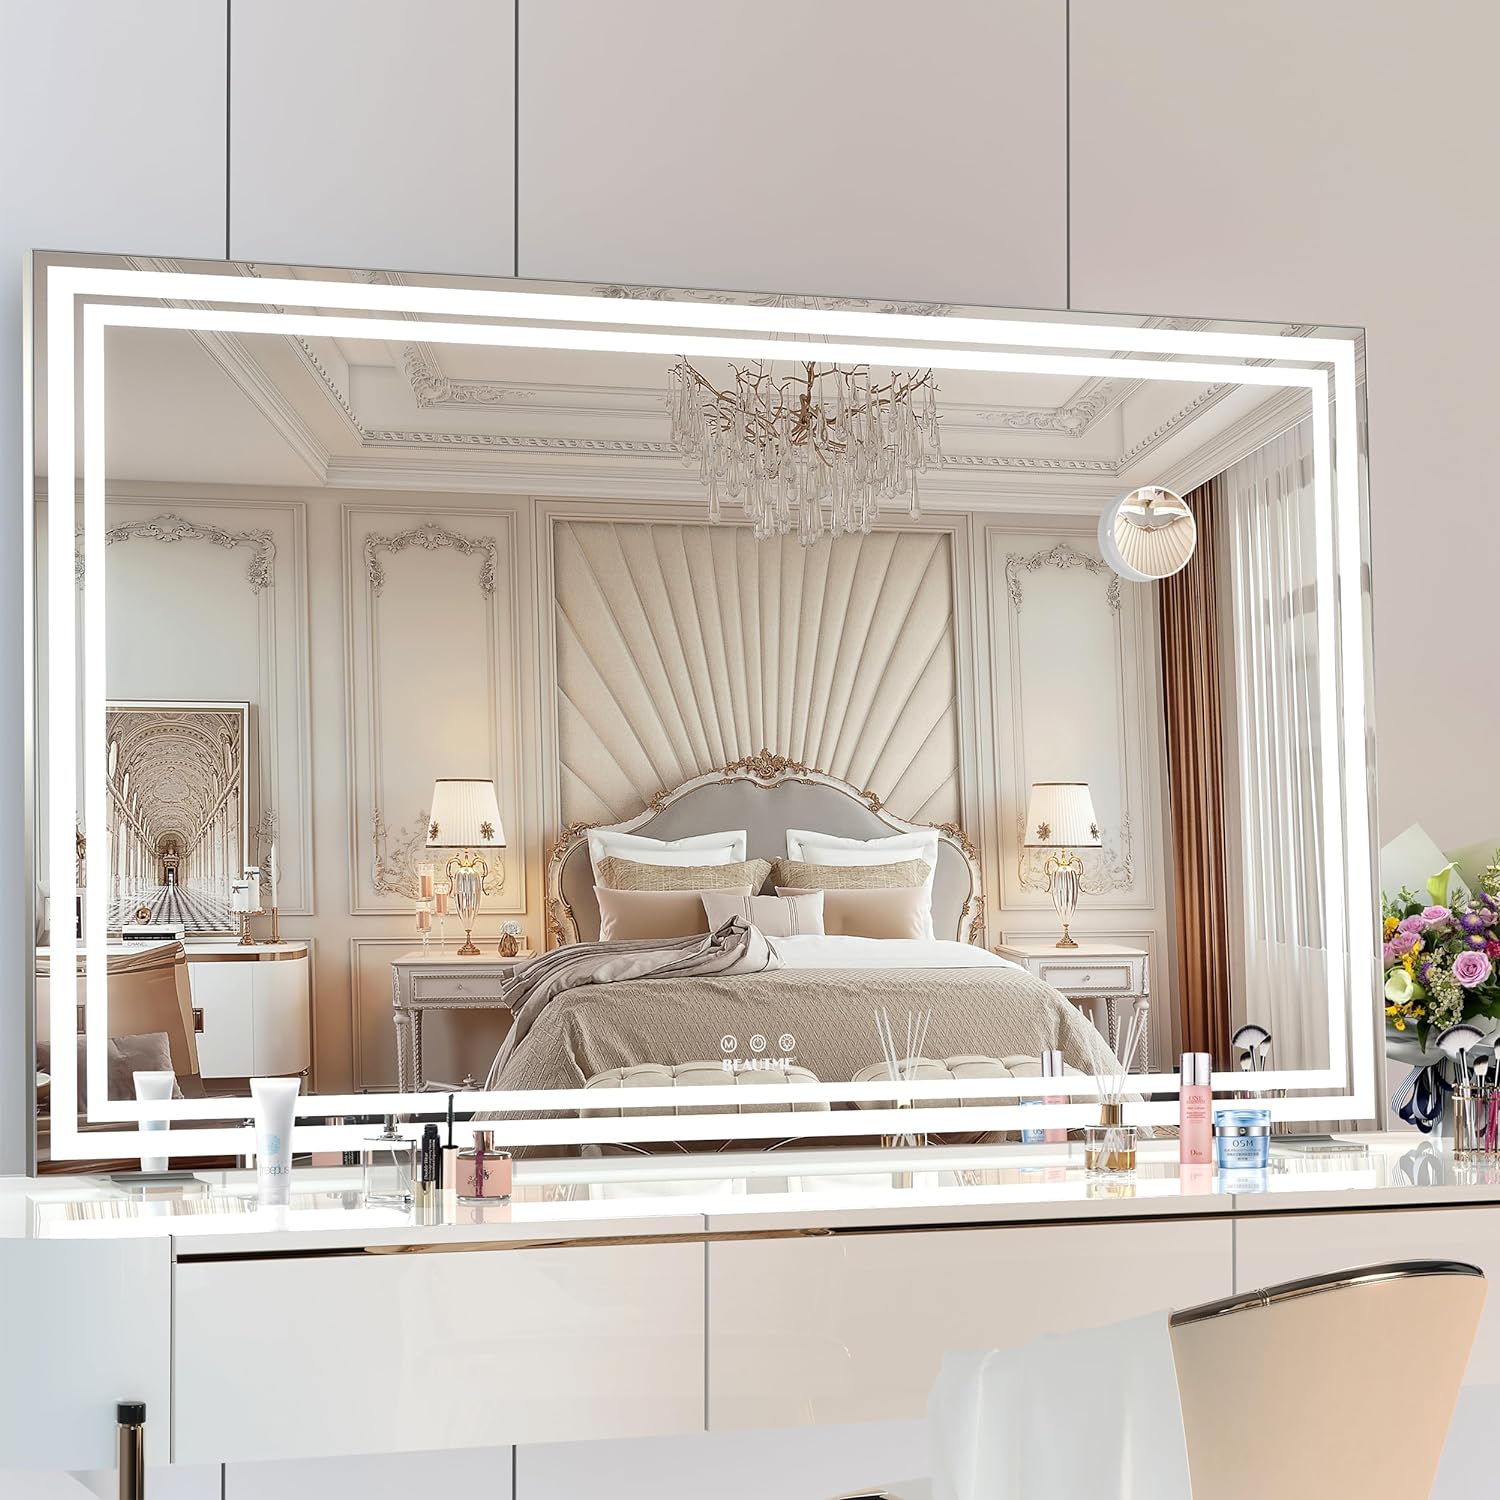 BEAUTME Vanity Mirror, Large Hollywood Mirror with Lights for Tabletop,Lighted Makeup Mirror for Dressing Room & Bedroom, Desktop Mirror/Wall Mounted Mirror 1.8M Cable,Silver(101.6 × 61.7cm)